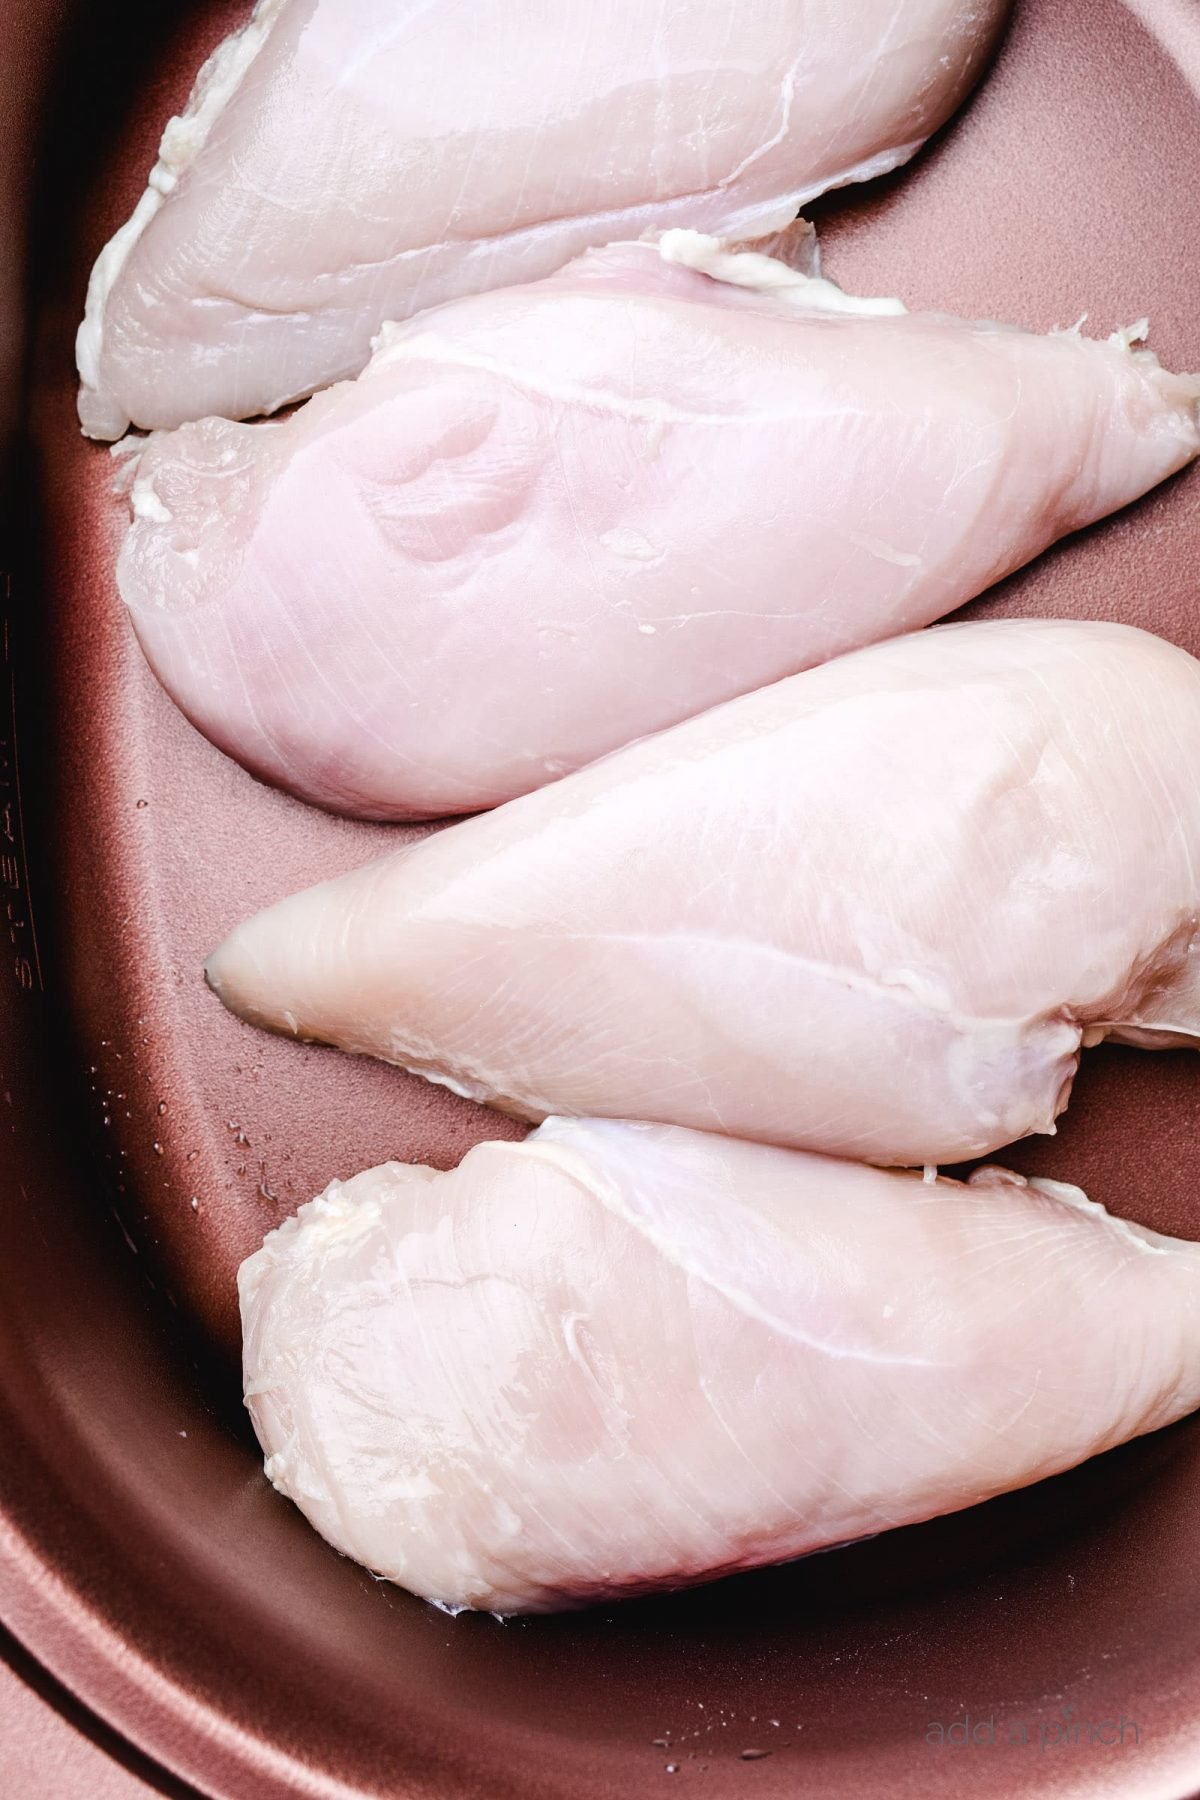 Boneless skinless chicken breasts in a slow cooker.